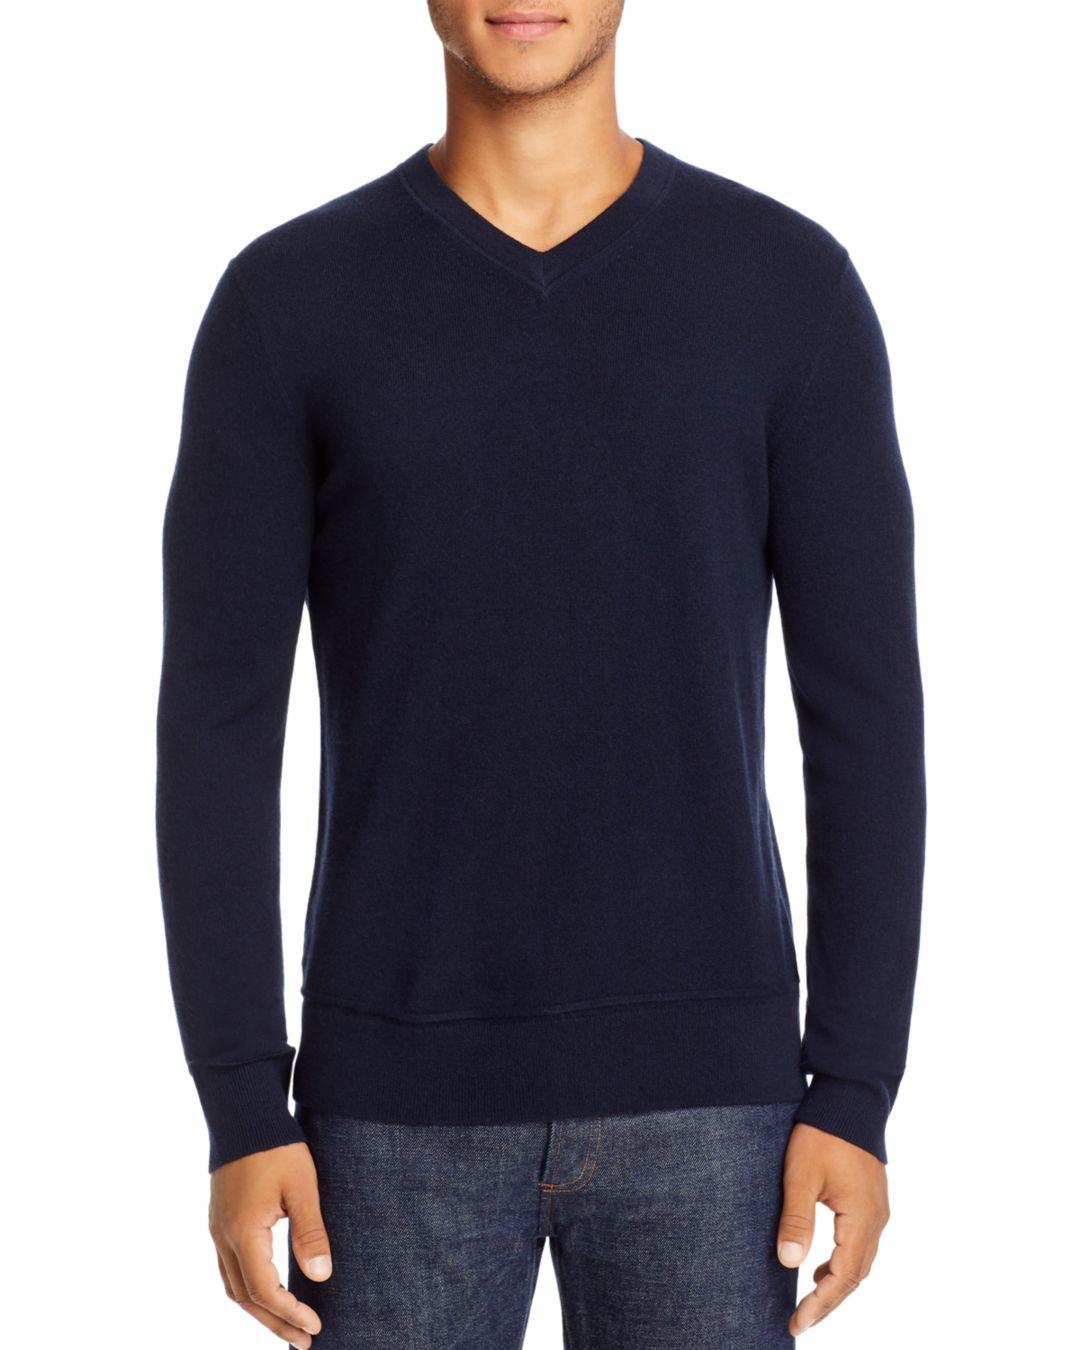 Theory Hilles Cashmere V - Neck Sweater in Blue for Men - Lyst